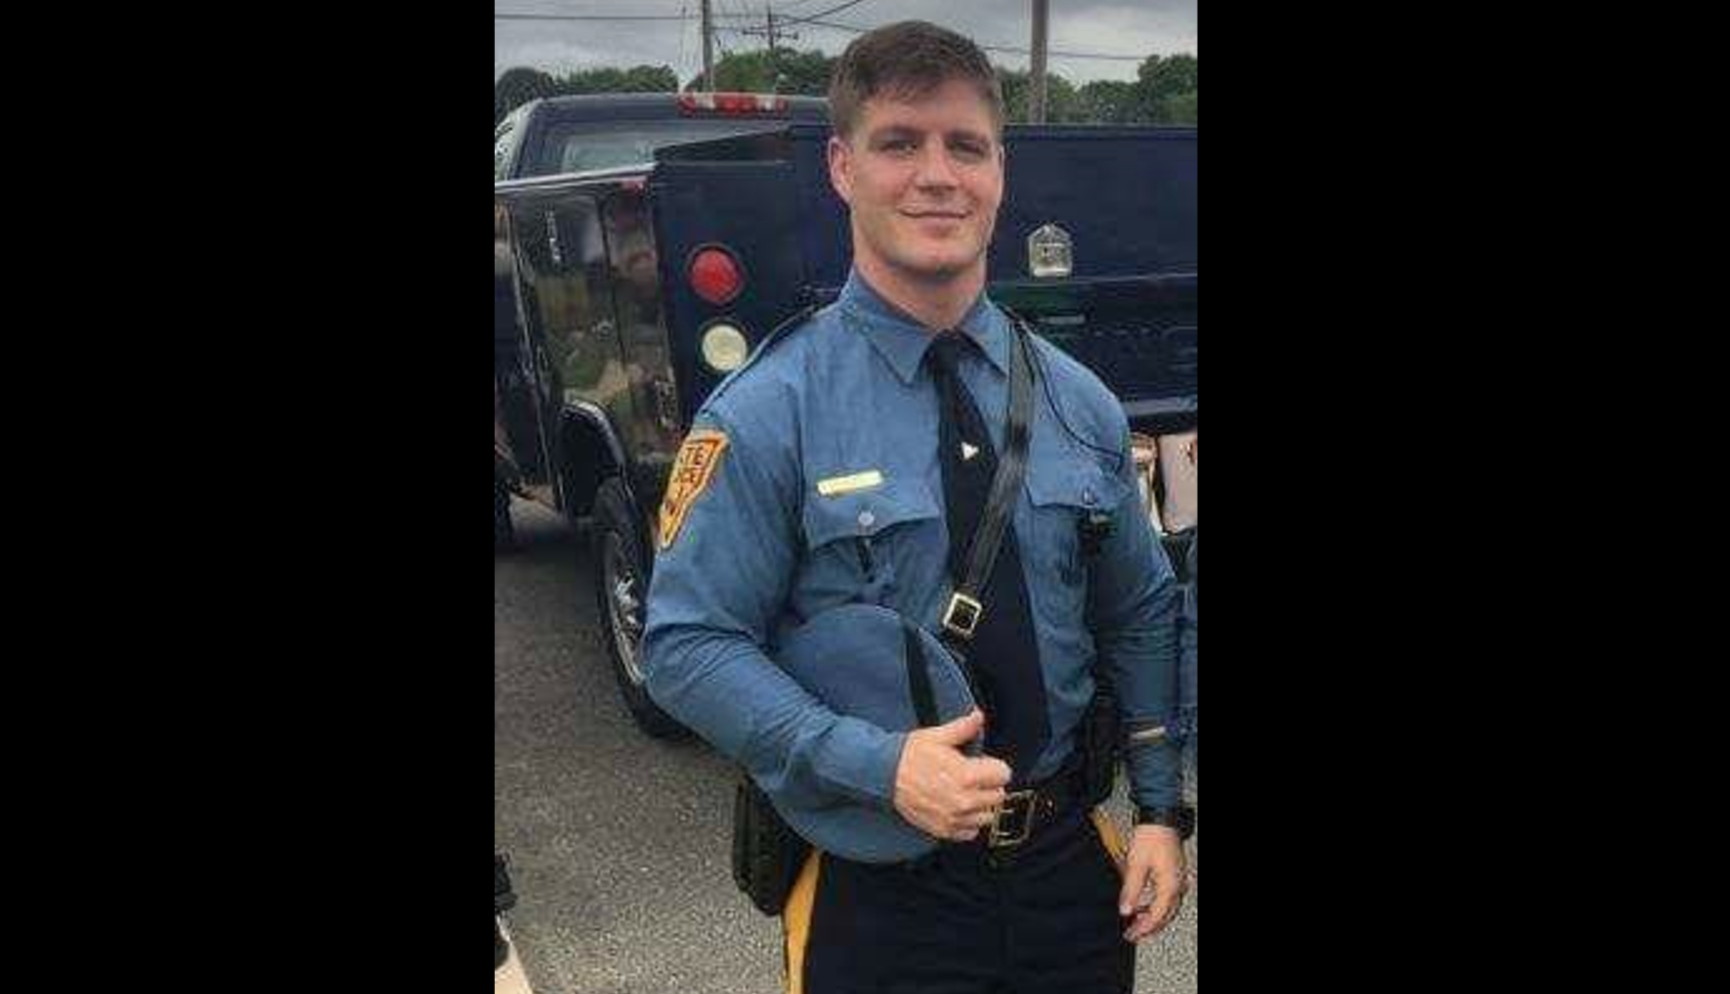  Trooper Joseph Falco. (Image courtesy of the New Jersey State Police) 